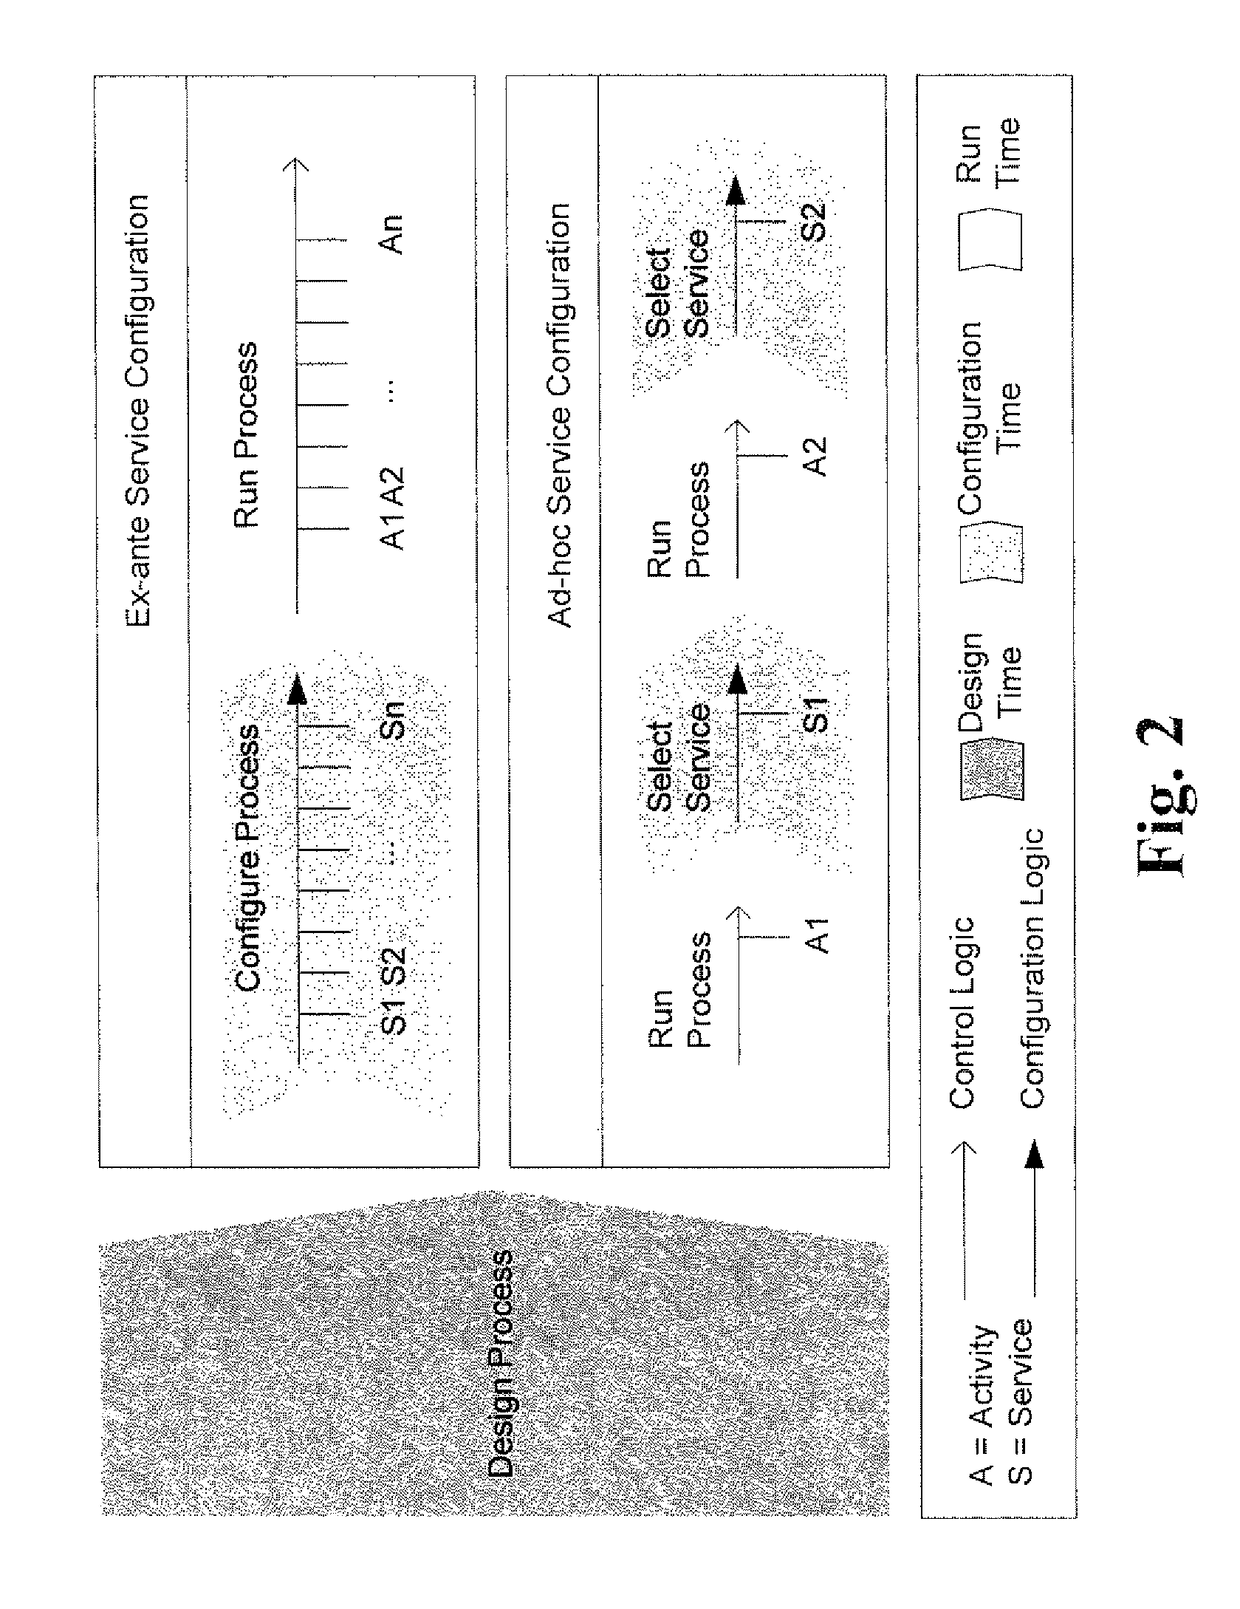 Service-oriented process configuration systems and/or methods